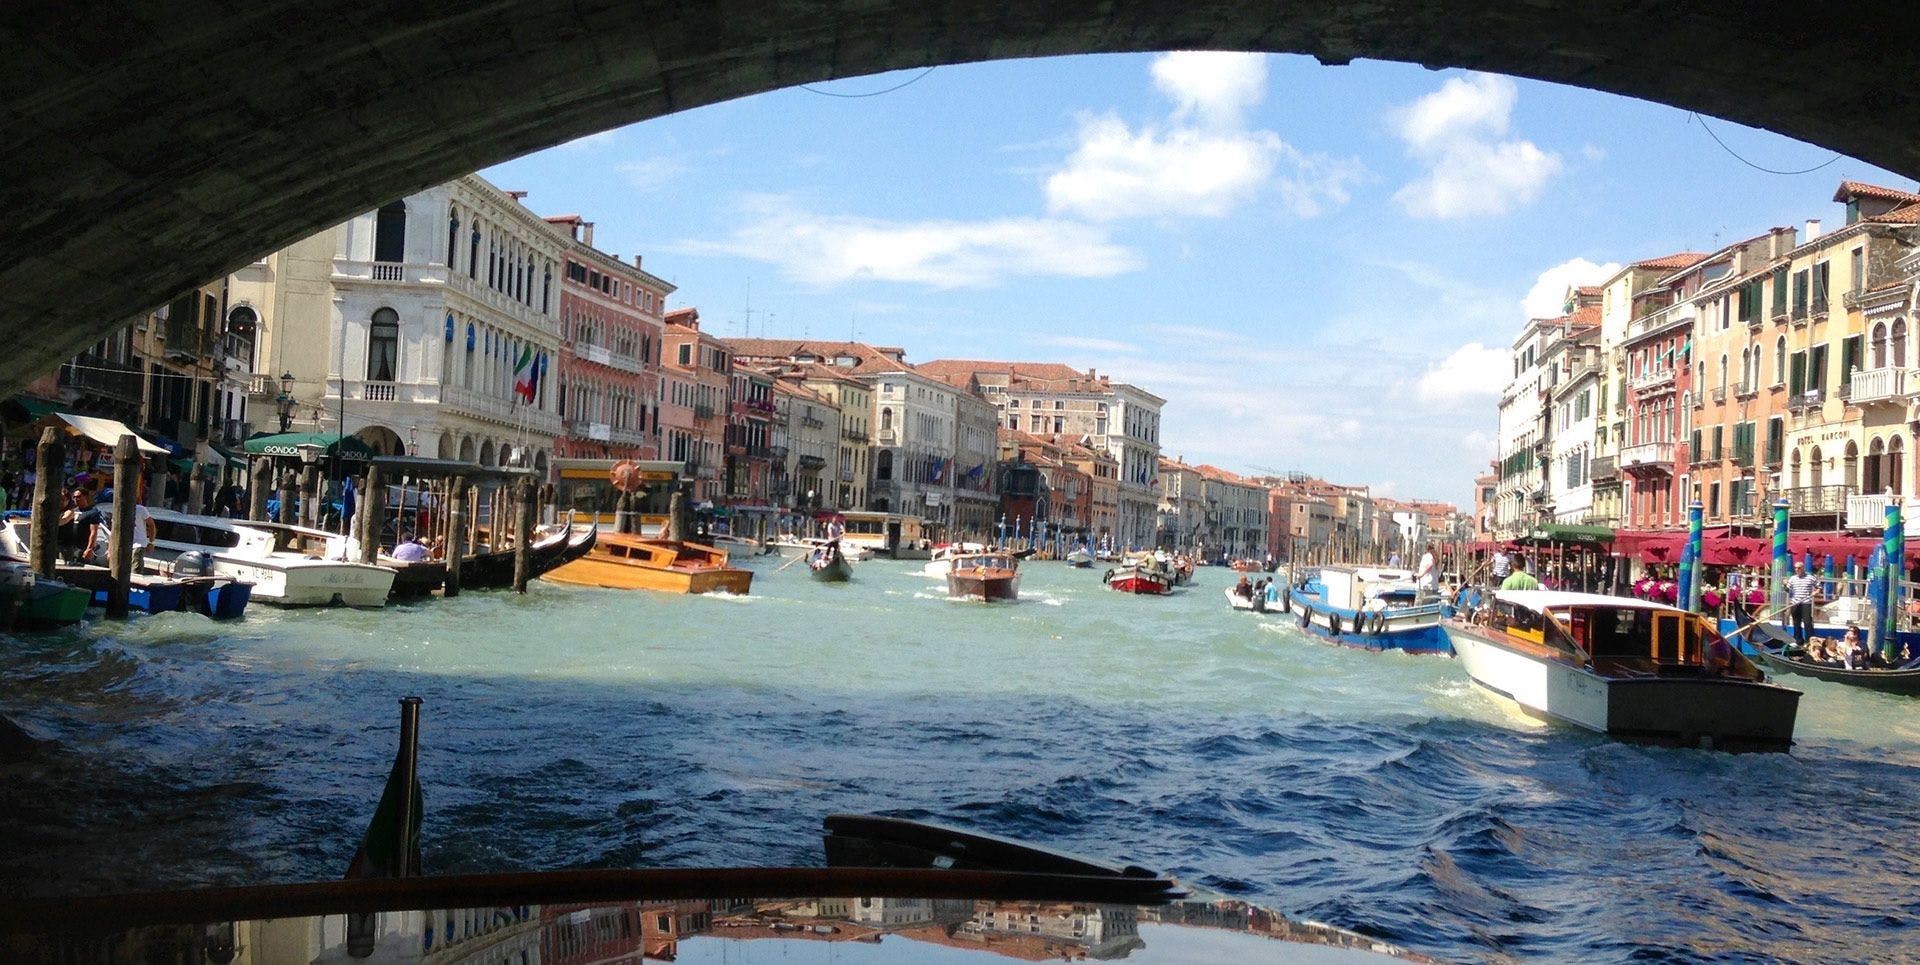 A holiday photo by Cynthia Zarin of a canal in Venice.